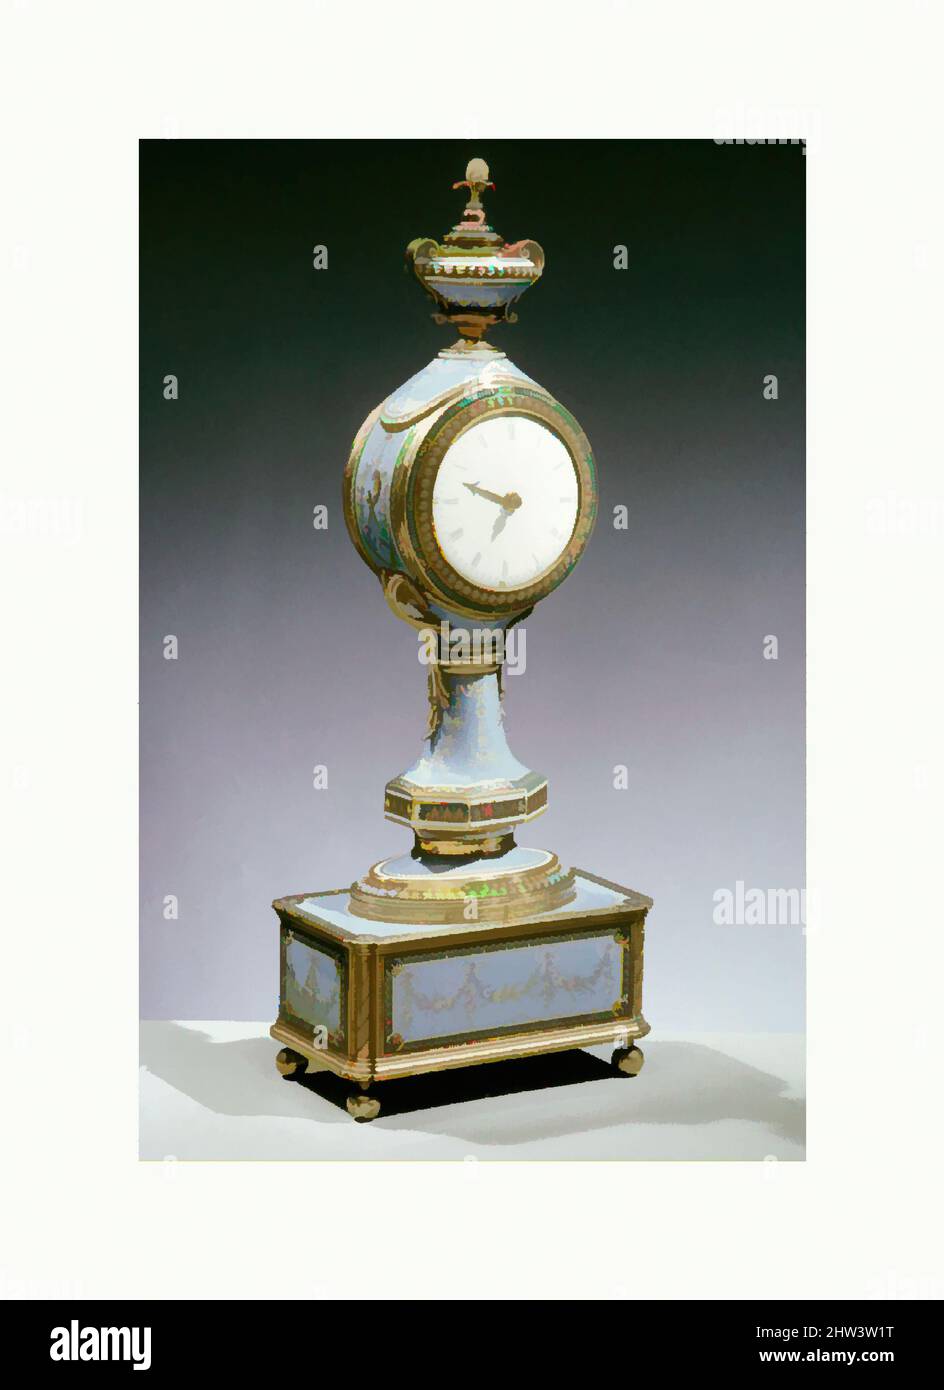 Art inspired by Boudoir clock, Clockmaker: Firm of Jaquet-Droz & Leschot, London and Geneva (1752–1791), ca. 1784–91, British, London with Swiss, Geneva case, Gold, enamel, 8 7/16 × 5 1/4 in. (21.4 × 13.3 cm), Horology, Clockmaker: Firm of Jaquet-Droz & Leschot, London and Geneva (1752, Classic works modernized by Artotop with a splash of modernity. Shapes, color and value, eye-catching visual impact on art. Emotions through freedom of artworks in a contemporary way. A timeless message pursuing a wildly creative new direction. Artists turning to the digital medium and creating the Artotop NFT Stock Photo